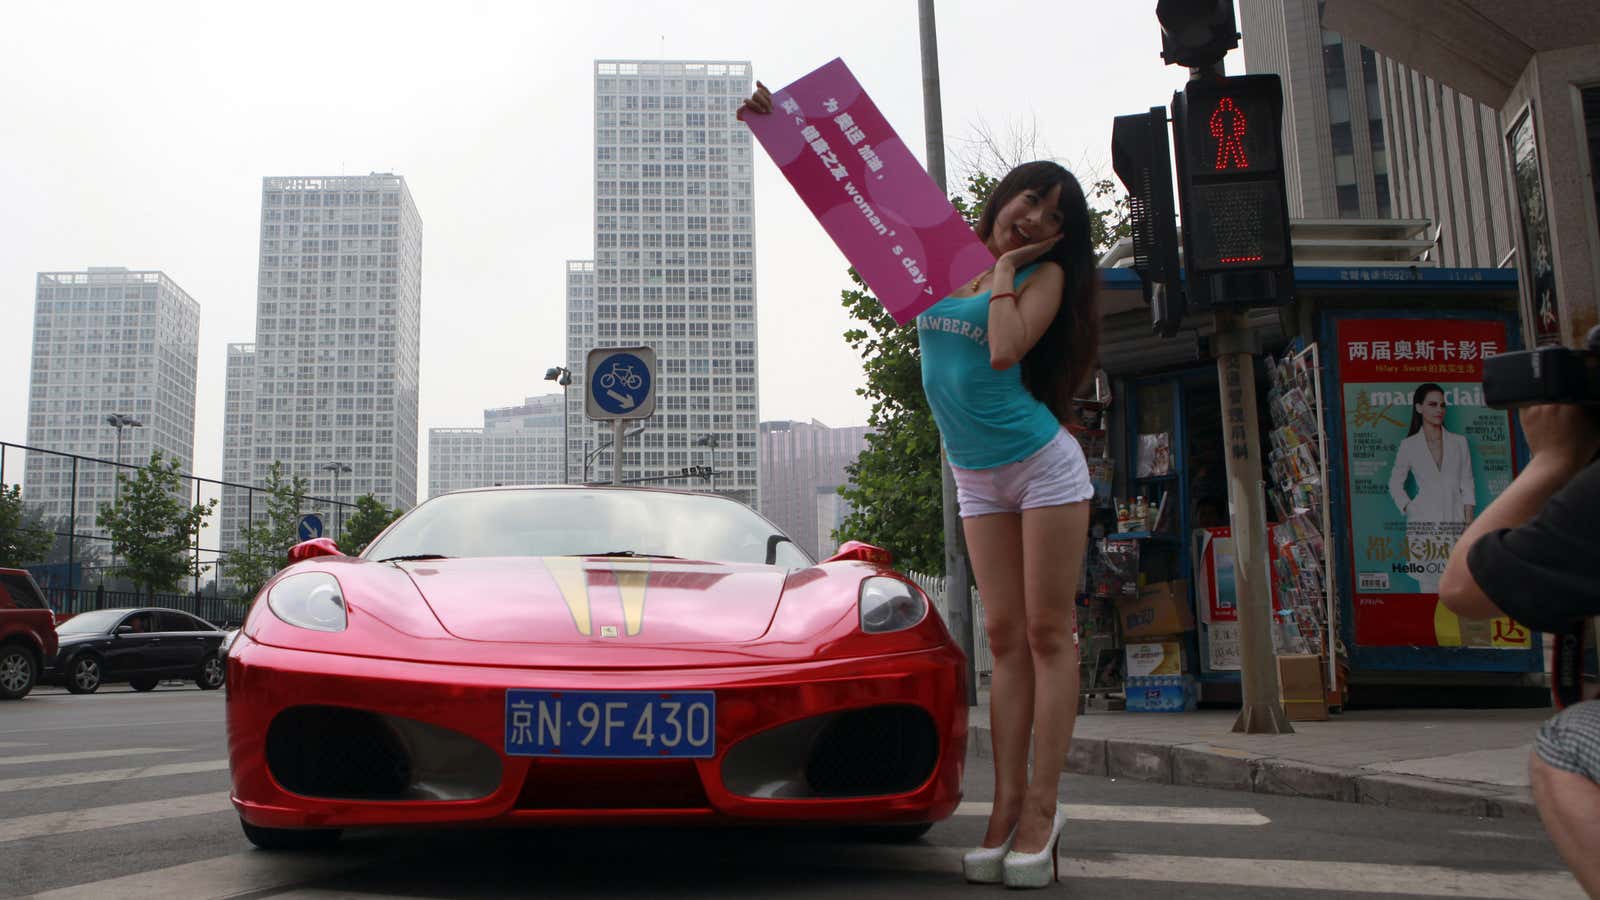 The sort of luxury campaign that China has purged.